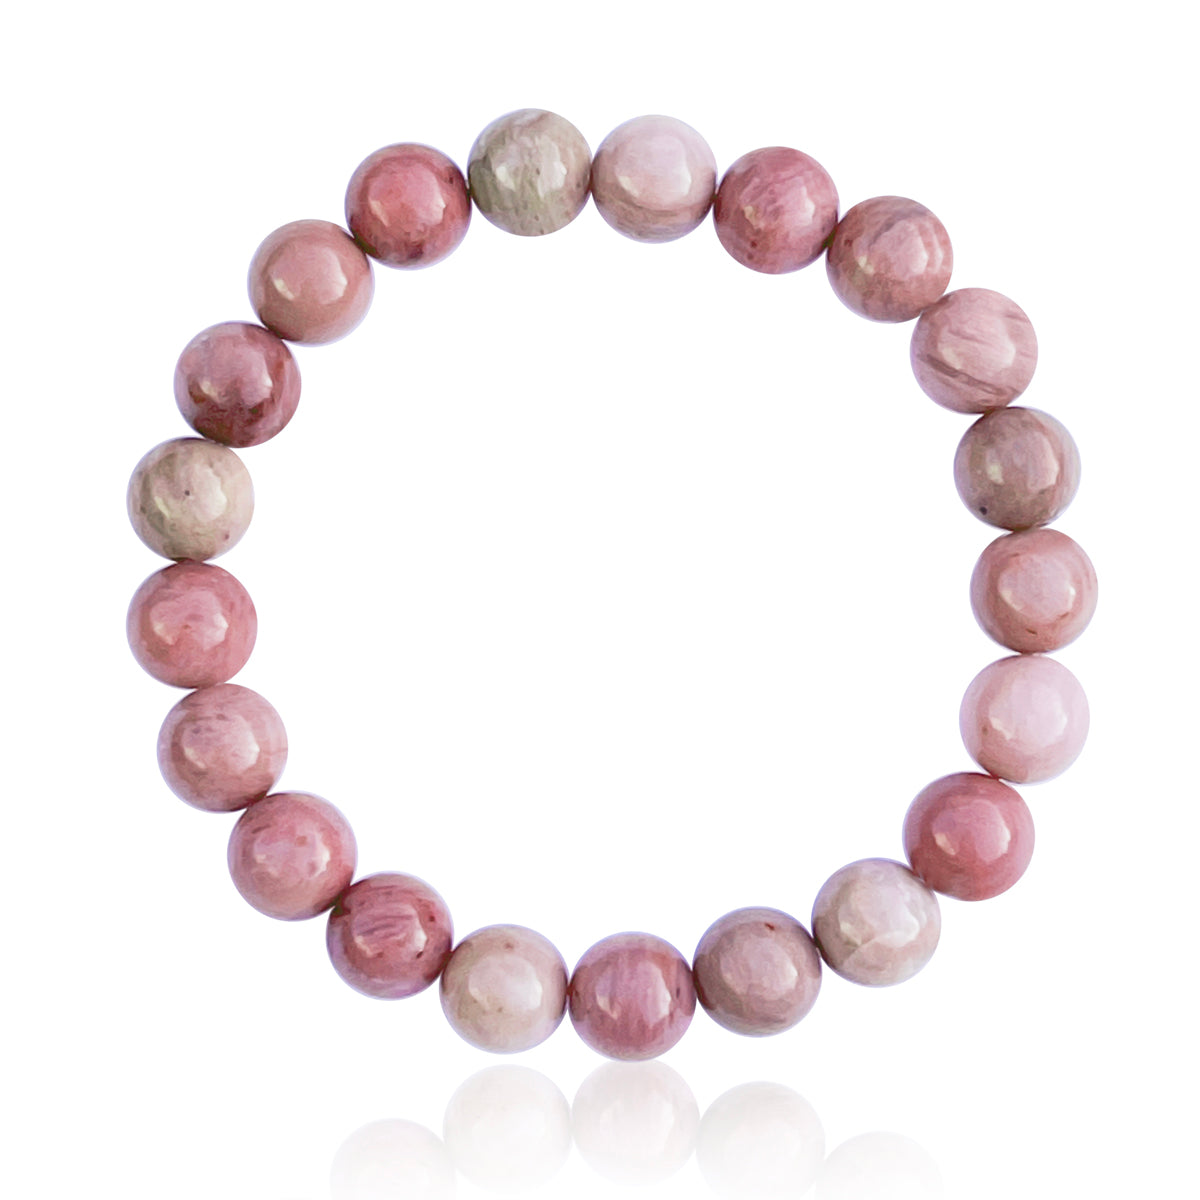 Emotional balance refers to the state of being able to manage and regulate one's emotions in a healthy and constructive way. This Rhodonite Wrap Bracelet helps you find emotional balance in your life. Rhodonite is a stone of compassion, an emotional balancer that clears away emotional wounds and scars from the past.